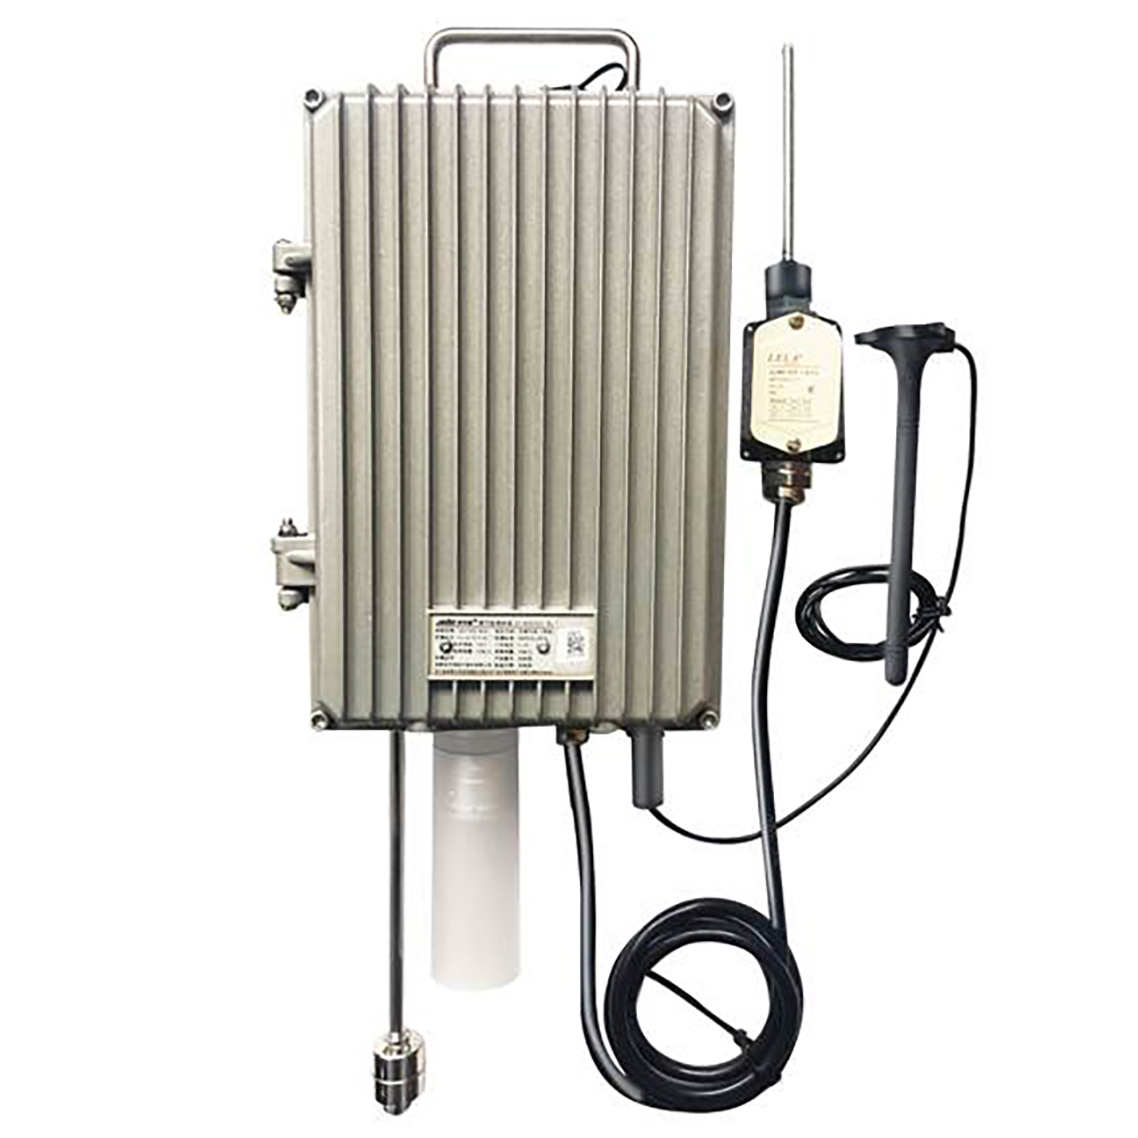 DT-AEC2531 Combustible Gas Monitoring Device for Underground Well Room Featured Image